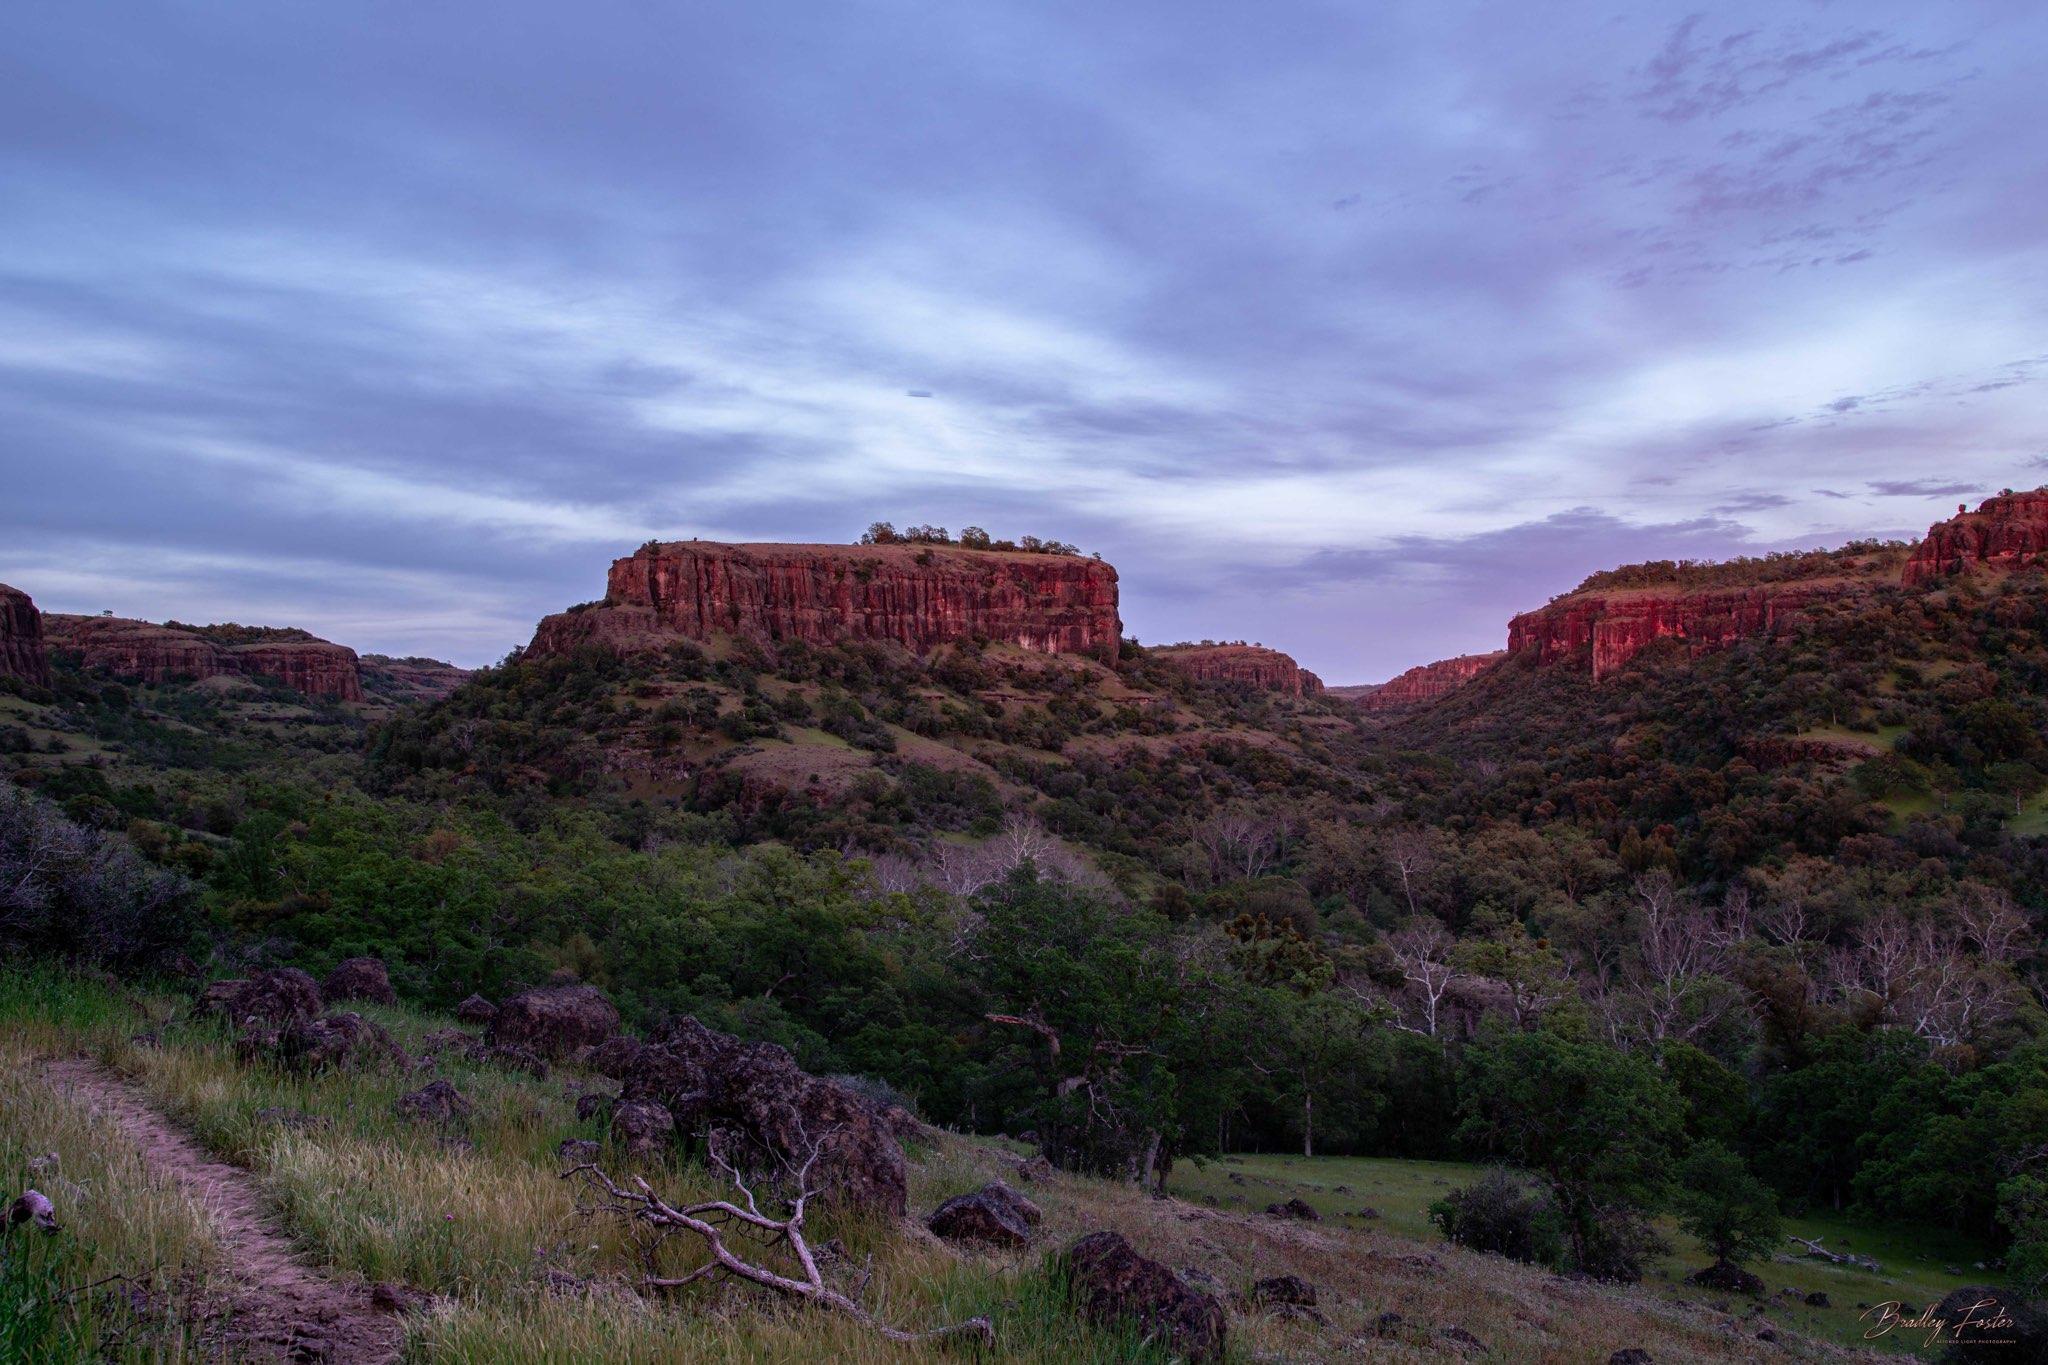 Rocky outcroppings and wodded landscape of Campo Seco in the evening twilight.